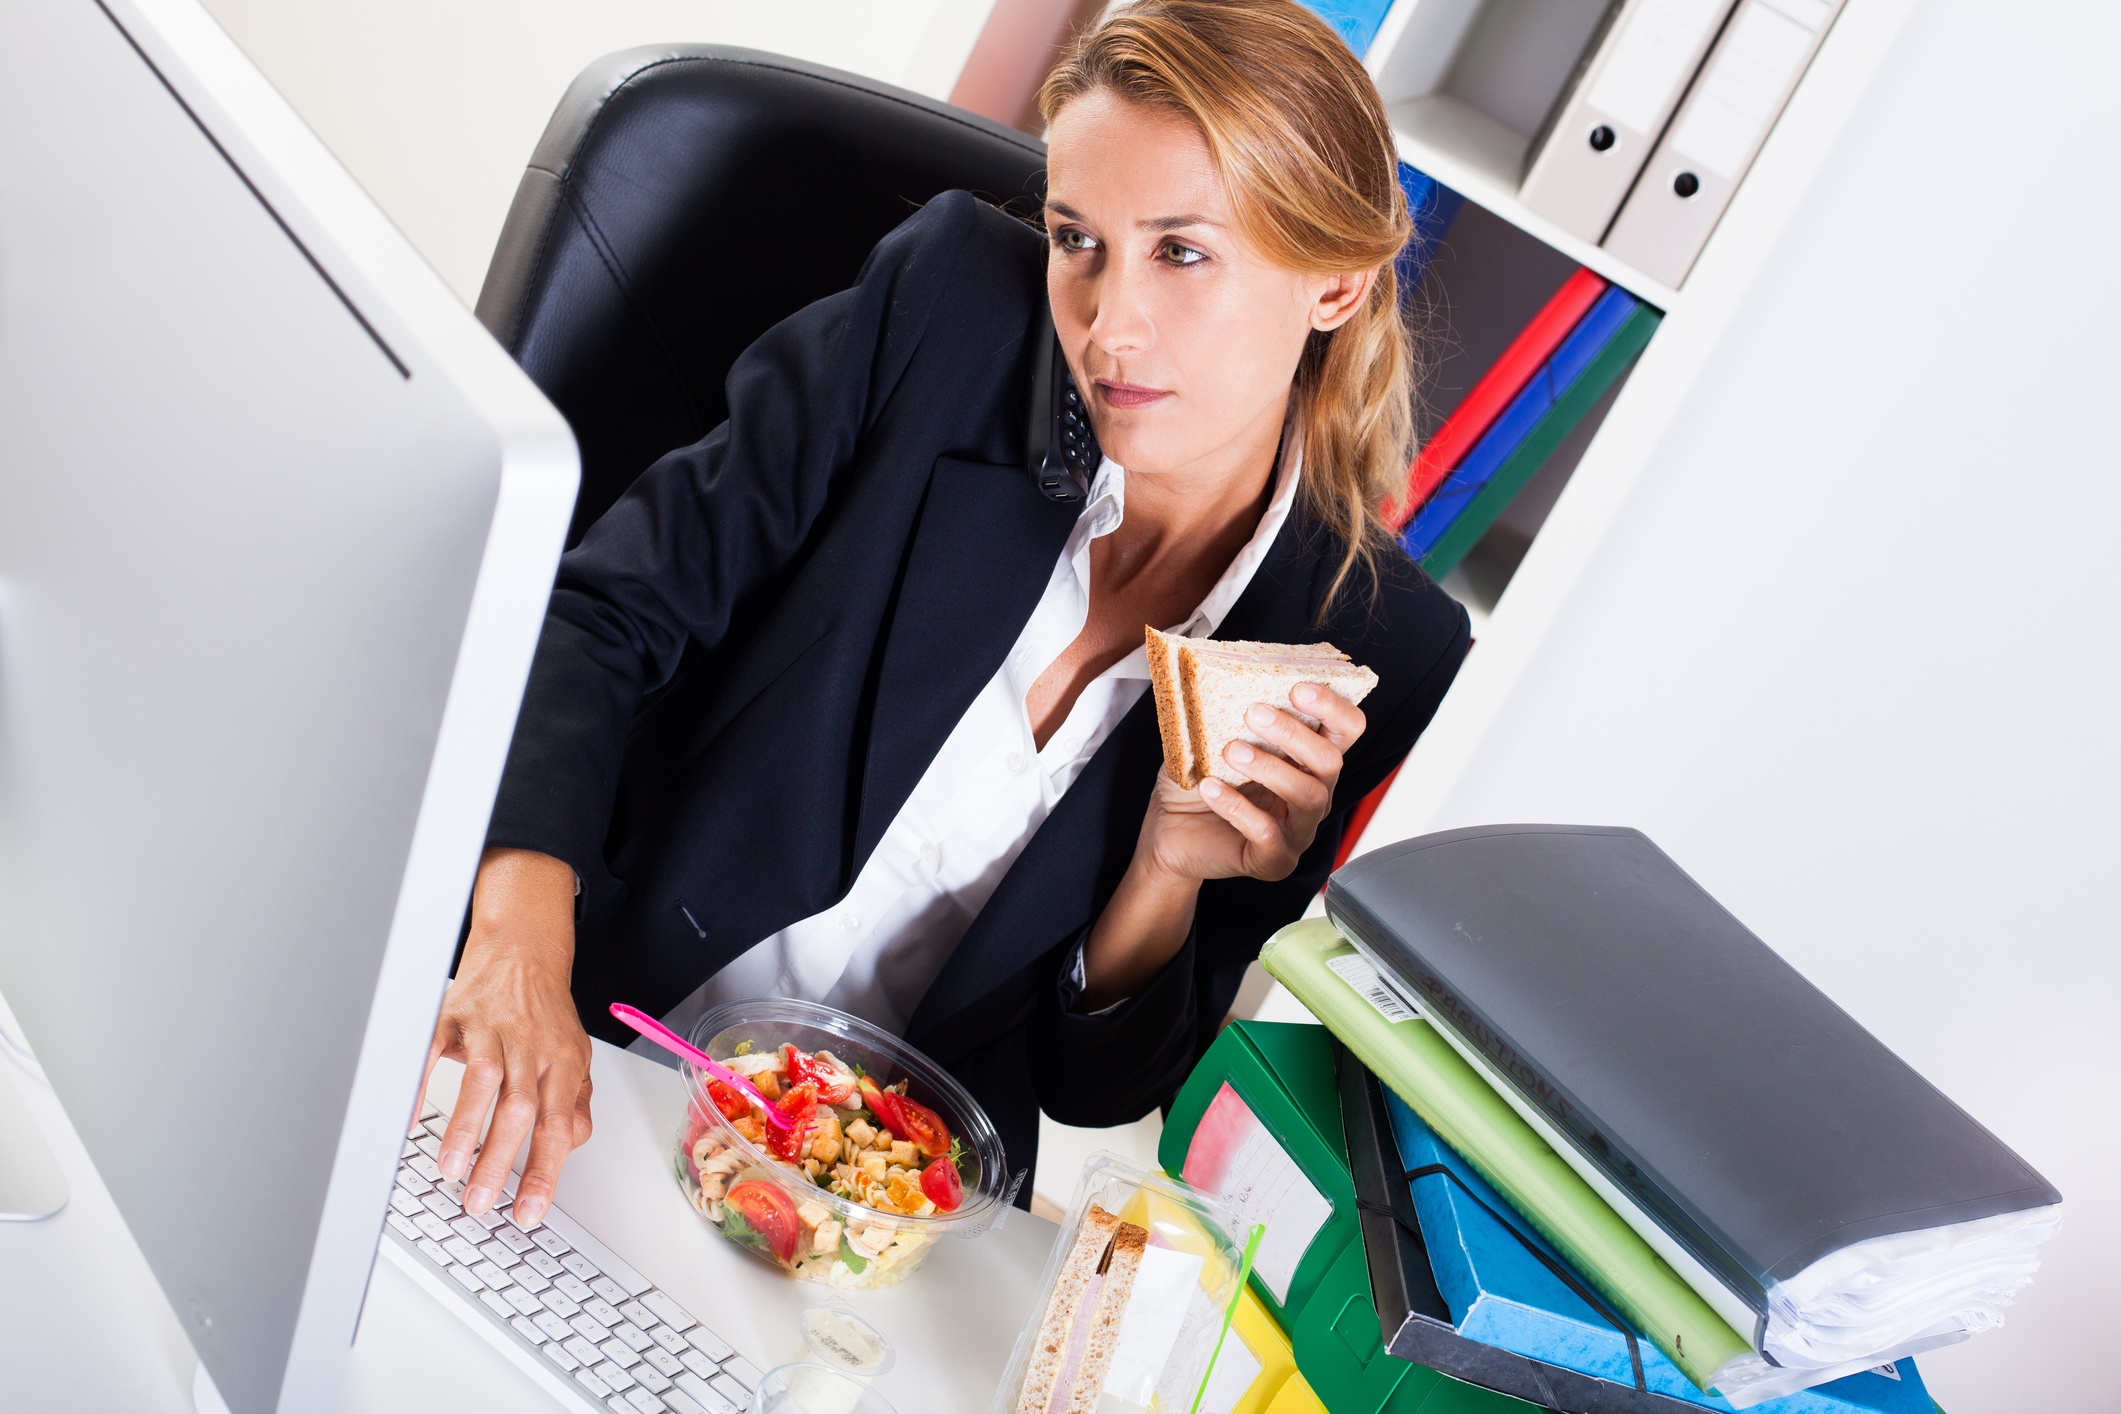 Employee eating lunch and working at her computer